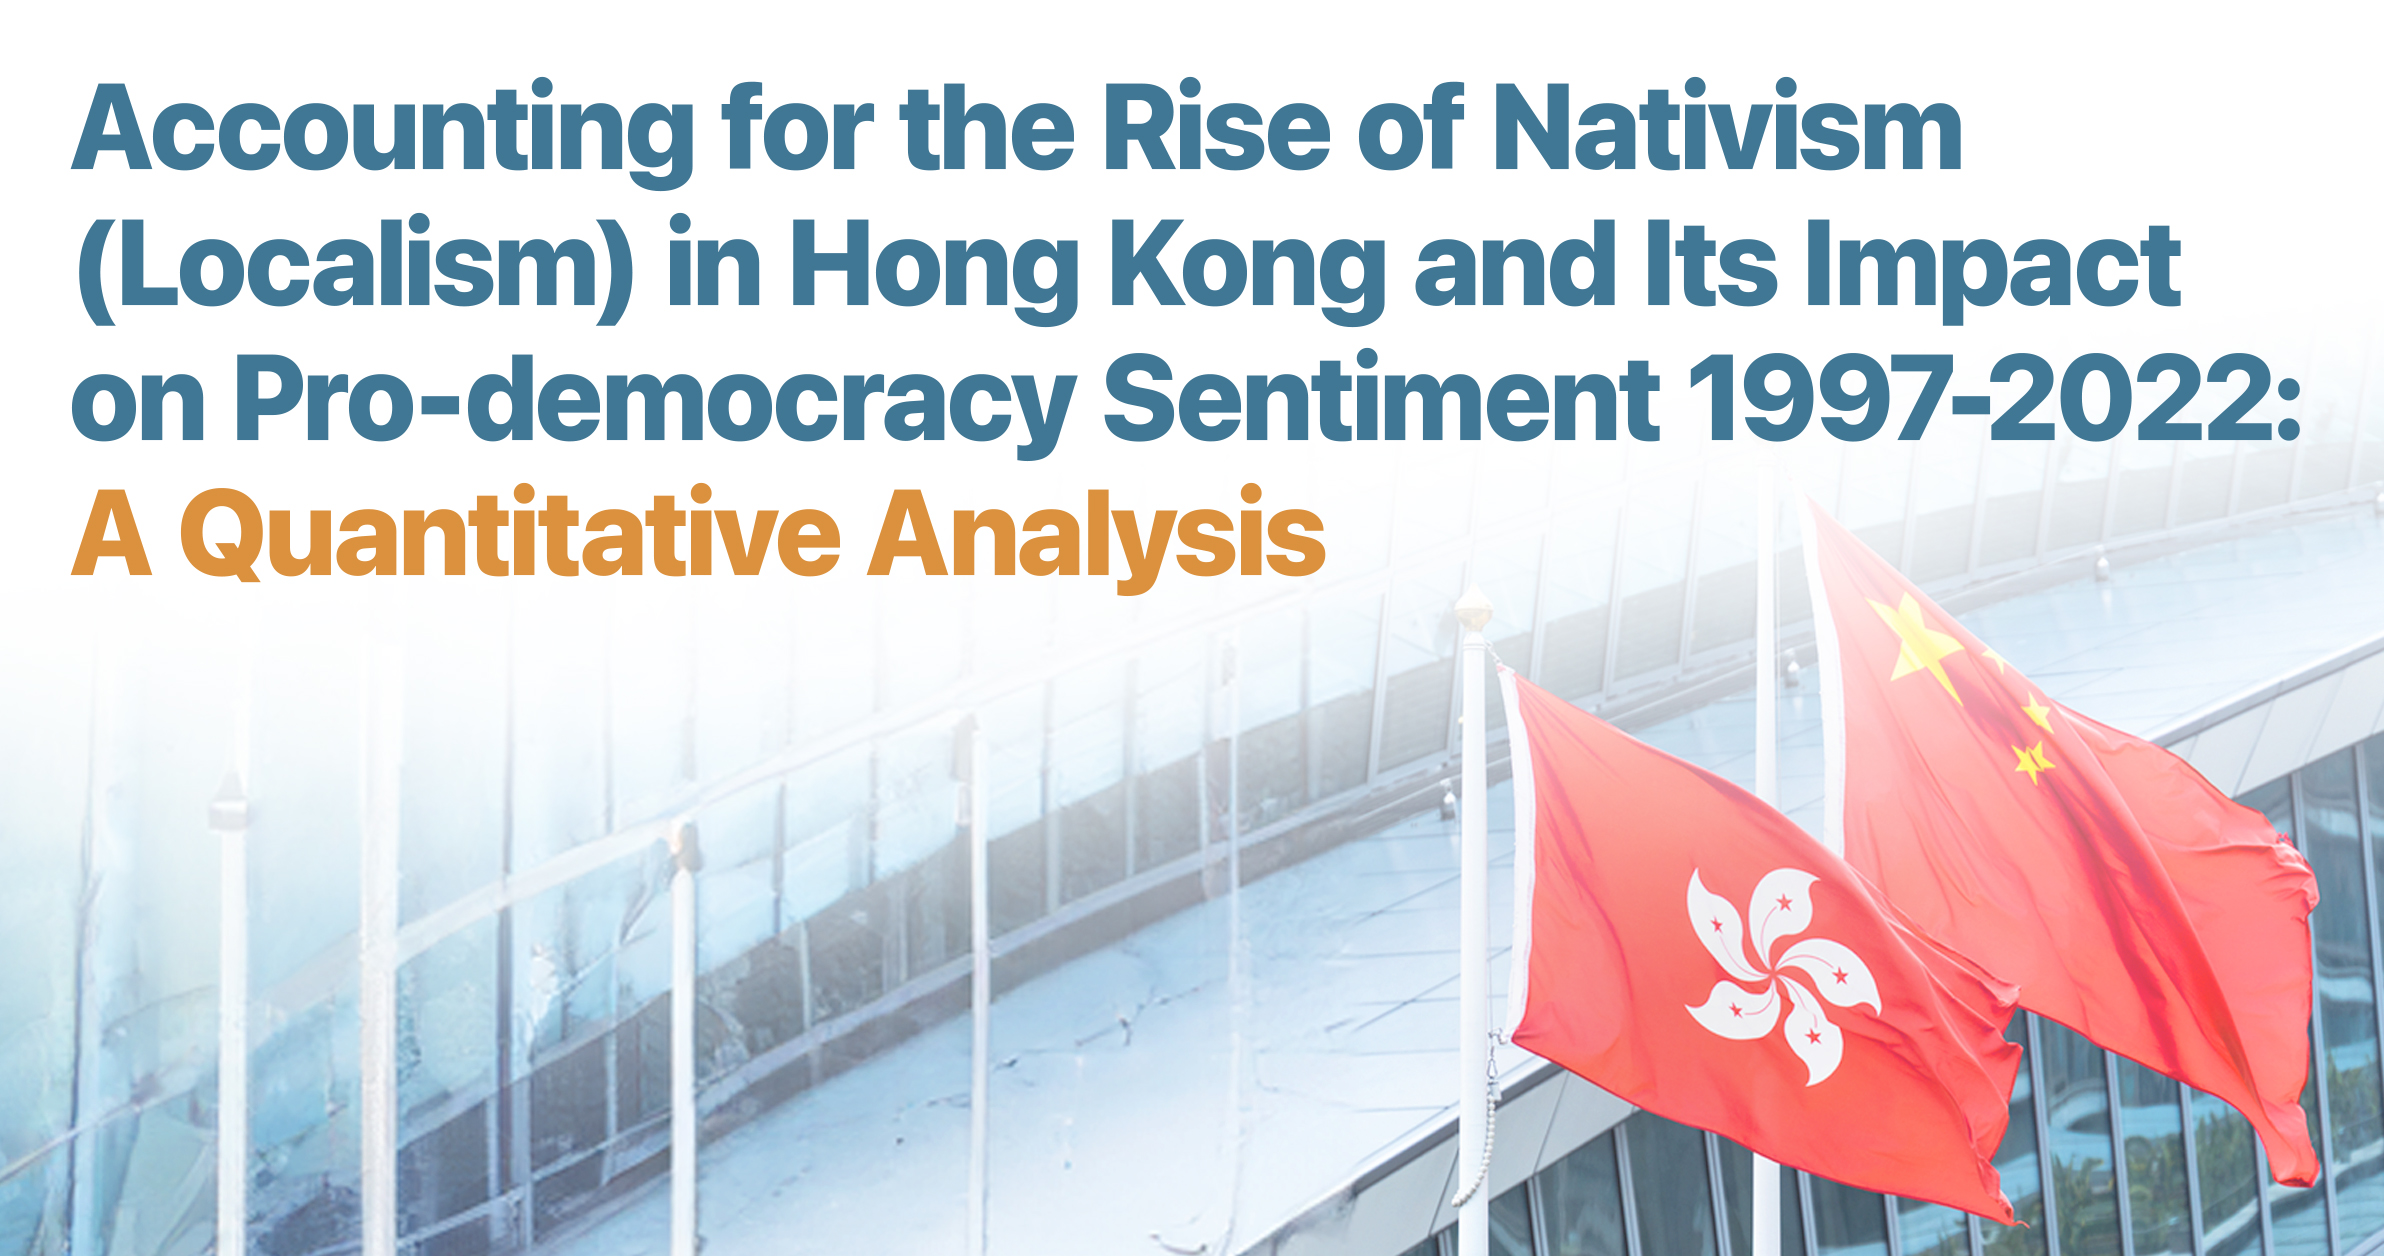 Accounting for the Rise of Nativism (Localism) in Hong Kong and Its Impact on Pro-democracy Sentiment 1997-2022: A Quantitative Analysis